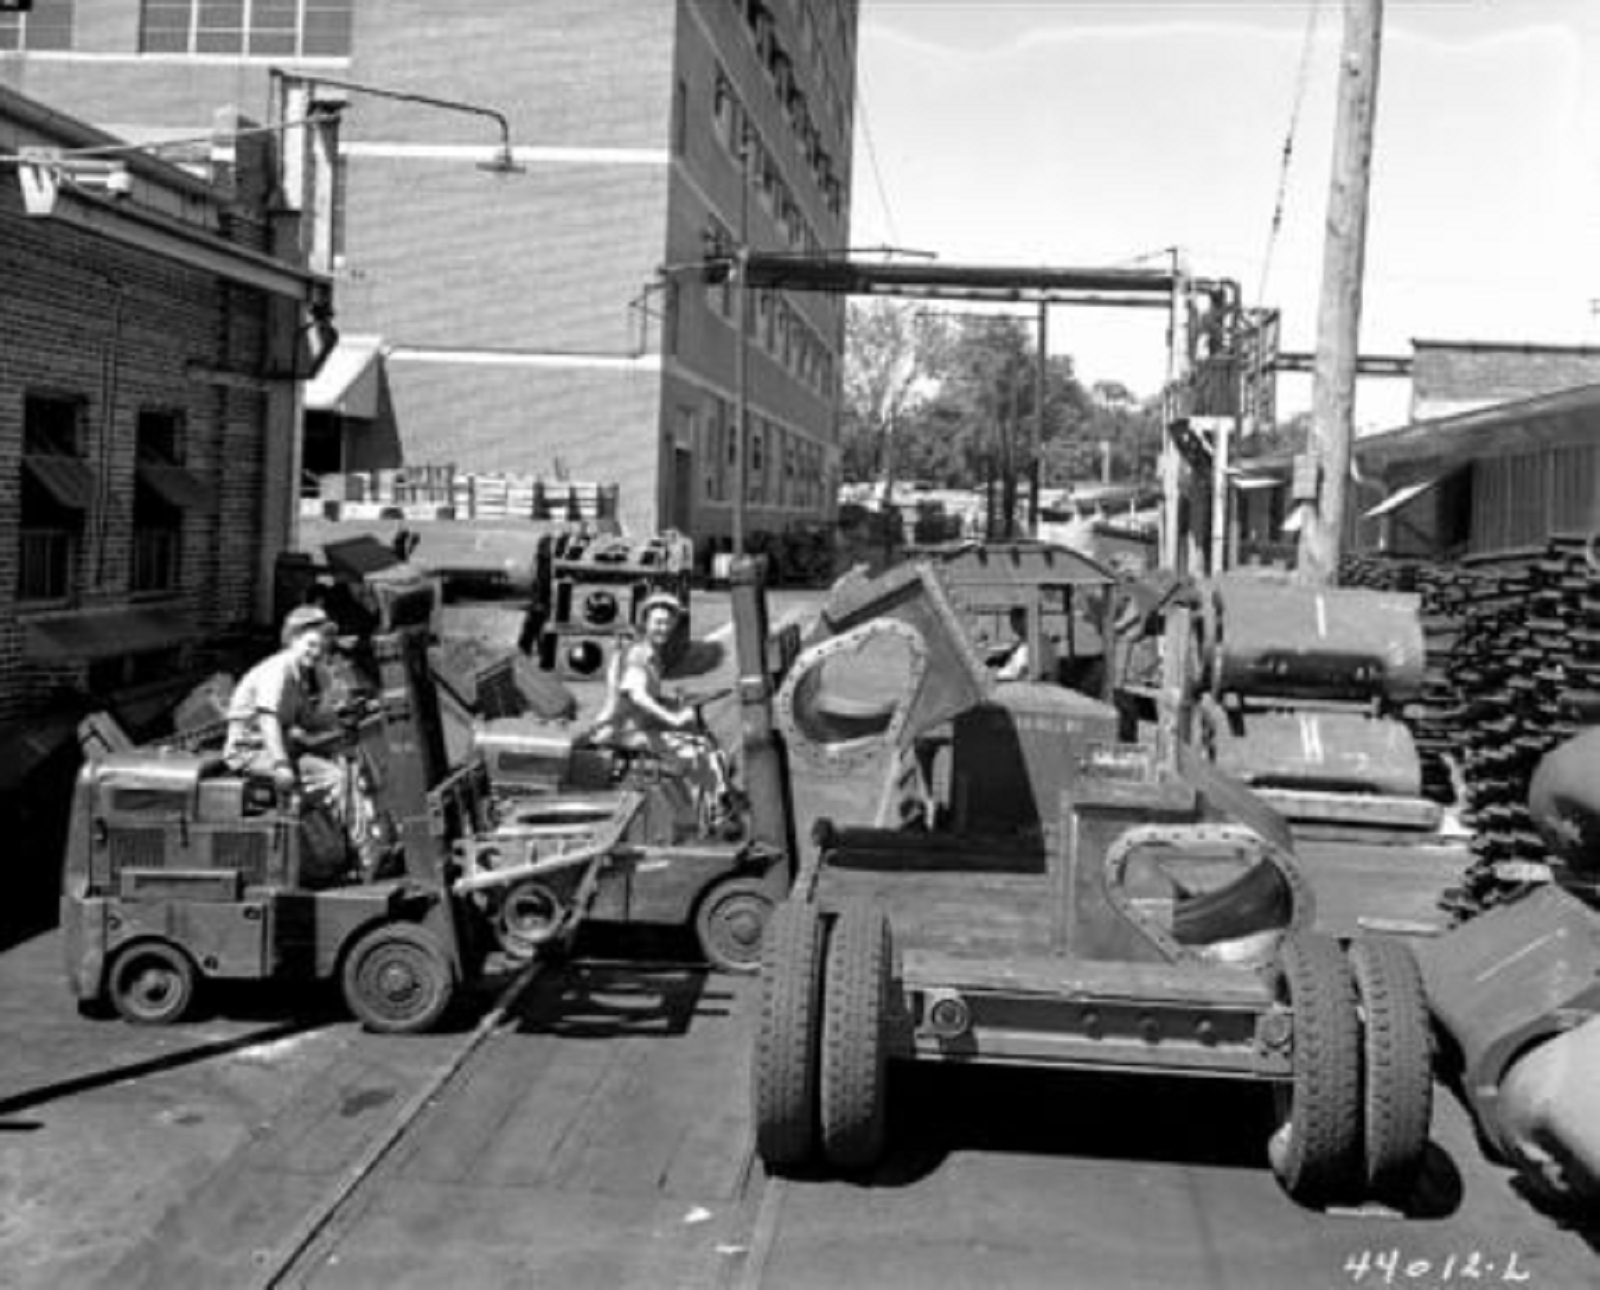 black and white photo of two women driving equipment outdoors at a large manufacturing site.